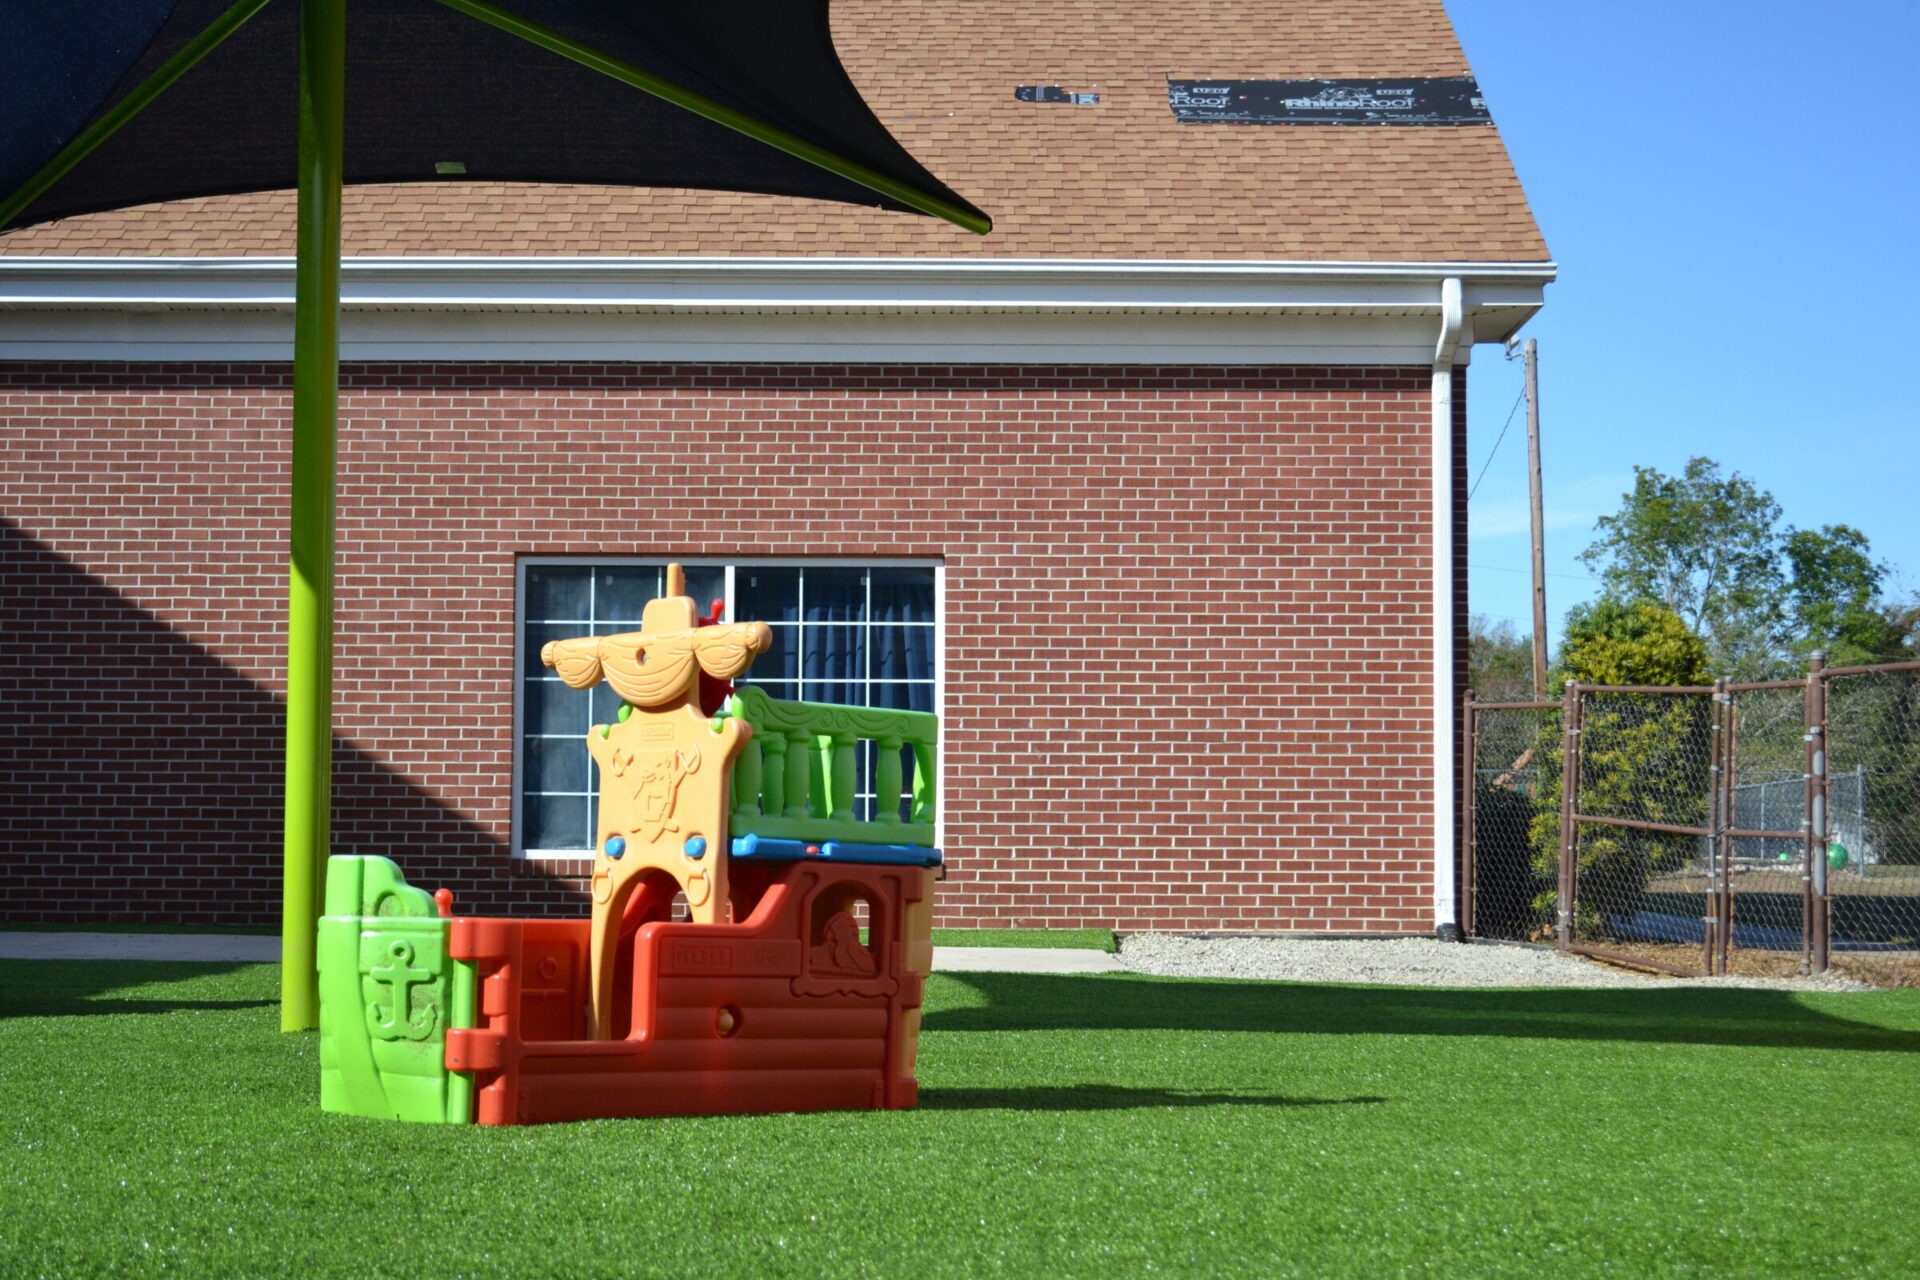 A colorful children's playground set stands on artificial turf, with a shaded canopy and a brick building in the background on a sunny day.